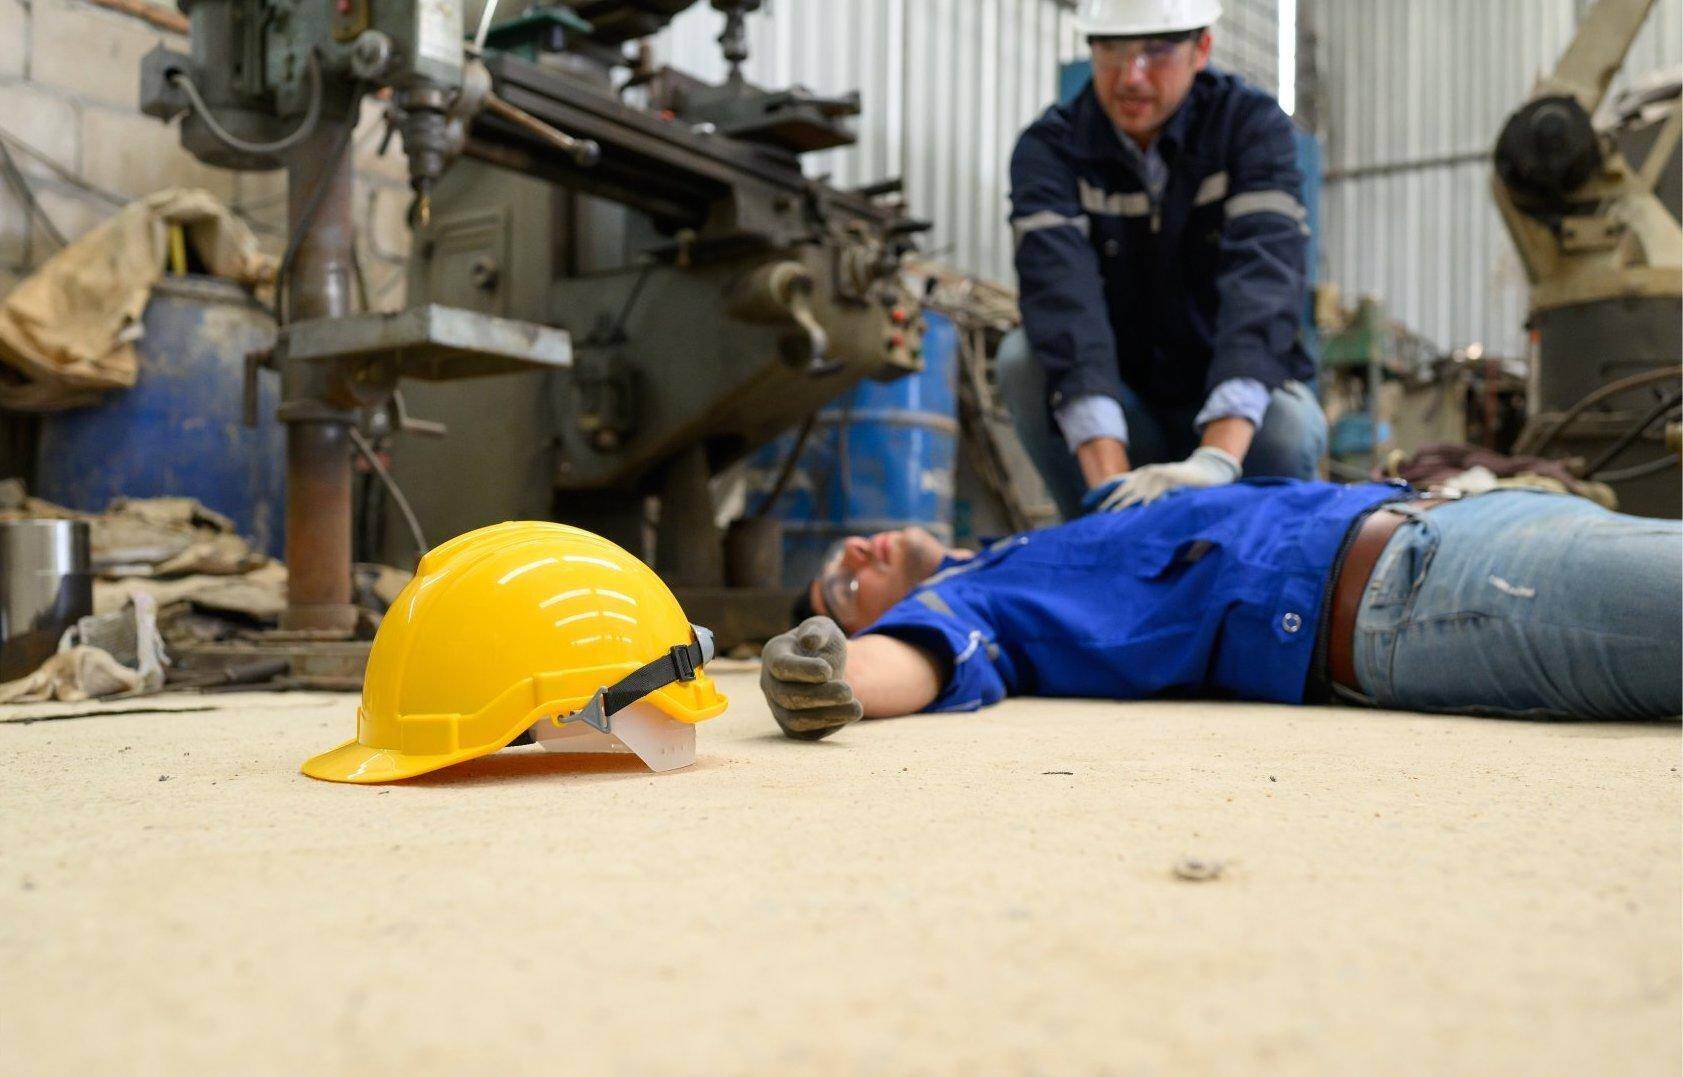 An unconscious man who has been injured on the job who will file for workers compensation in Covington, Georgia